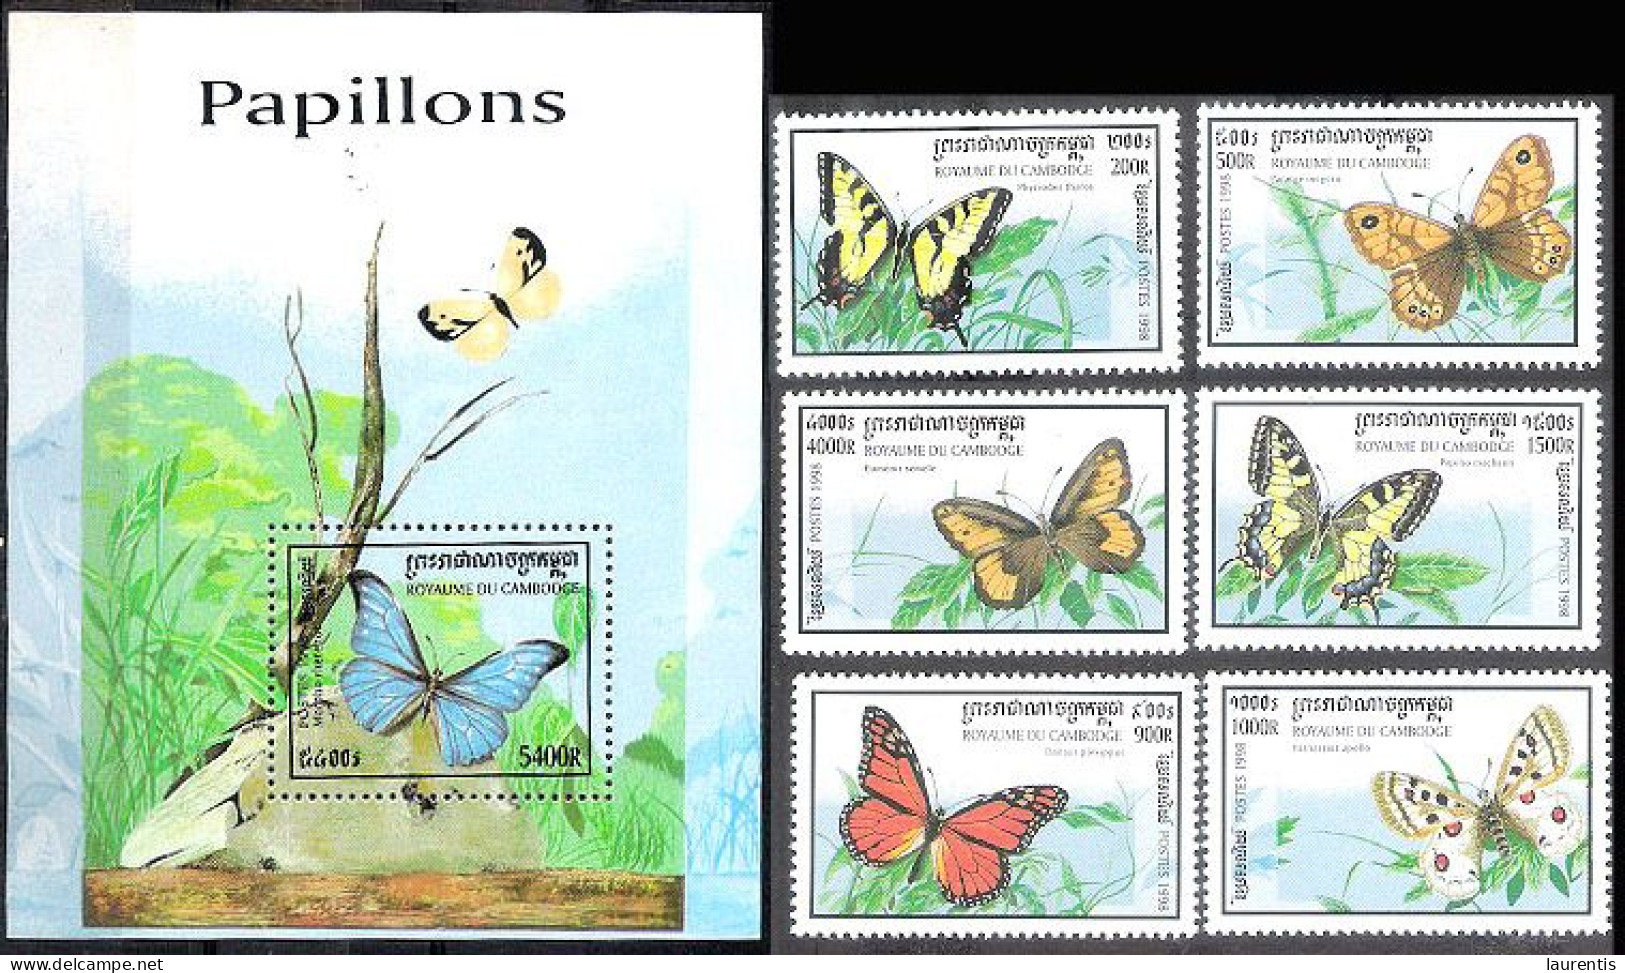 783  Papillons - Butterflies - Cambodge Yv 1548-53 + BF - MNH - 2,75 - Schmetterlinge